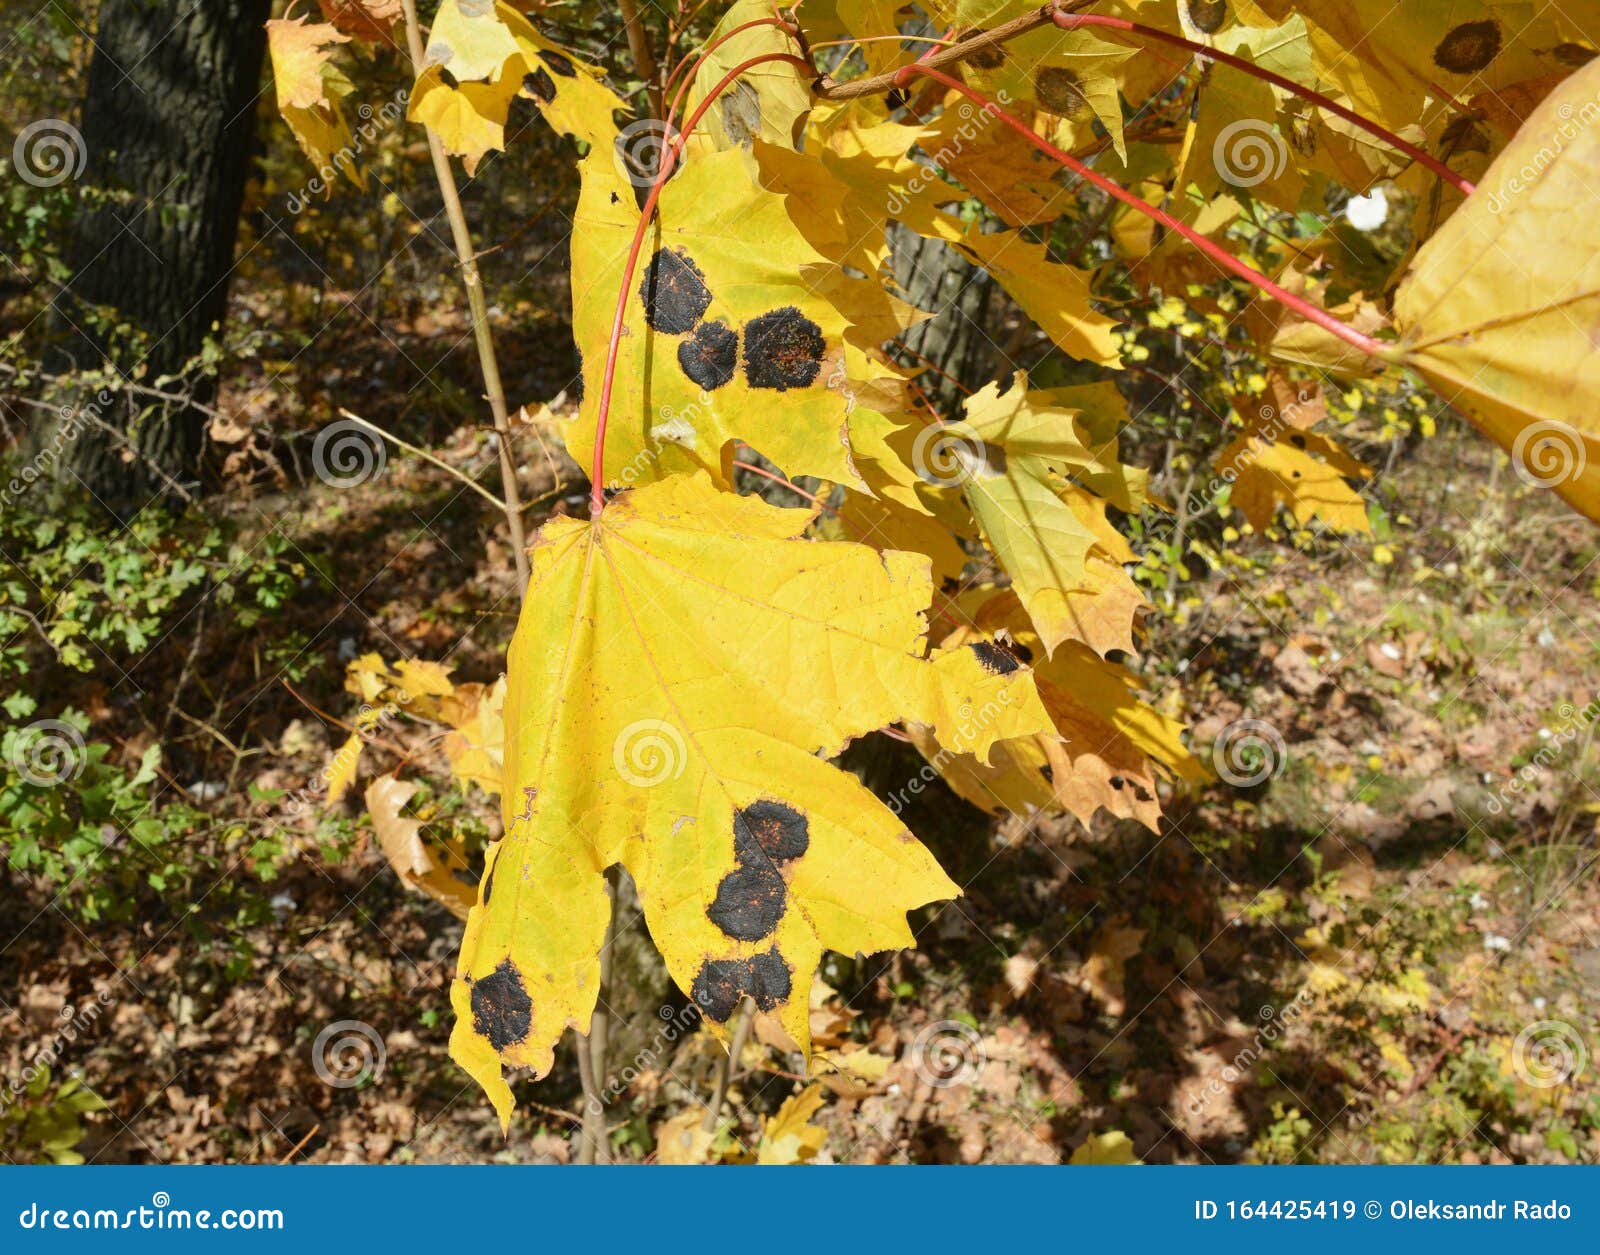 maple tree leaf diseases. tar black spot is one of the most readily visible and easiest maple diseases to diagnose